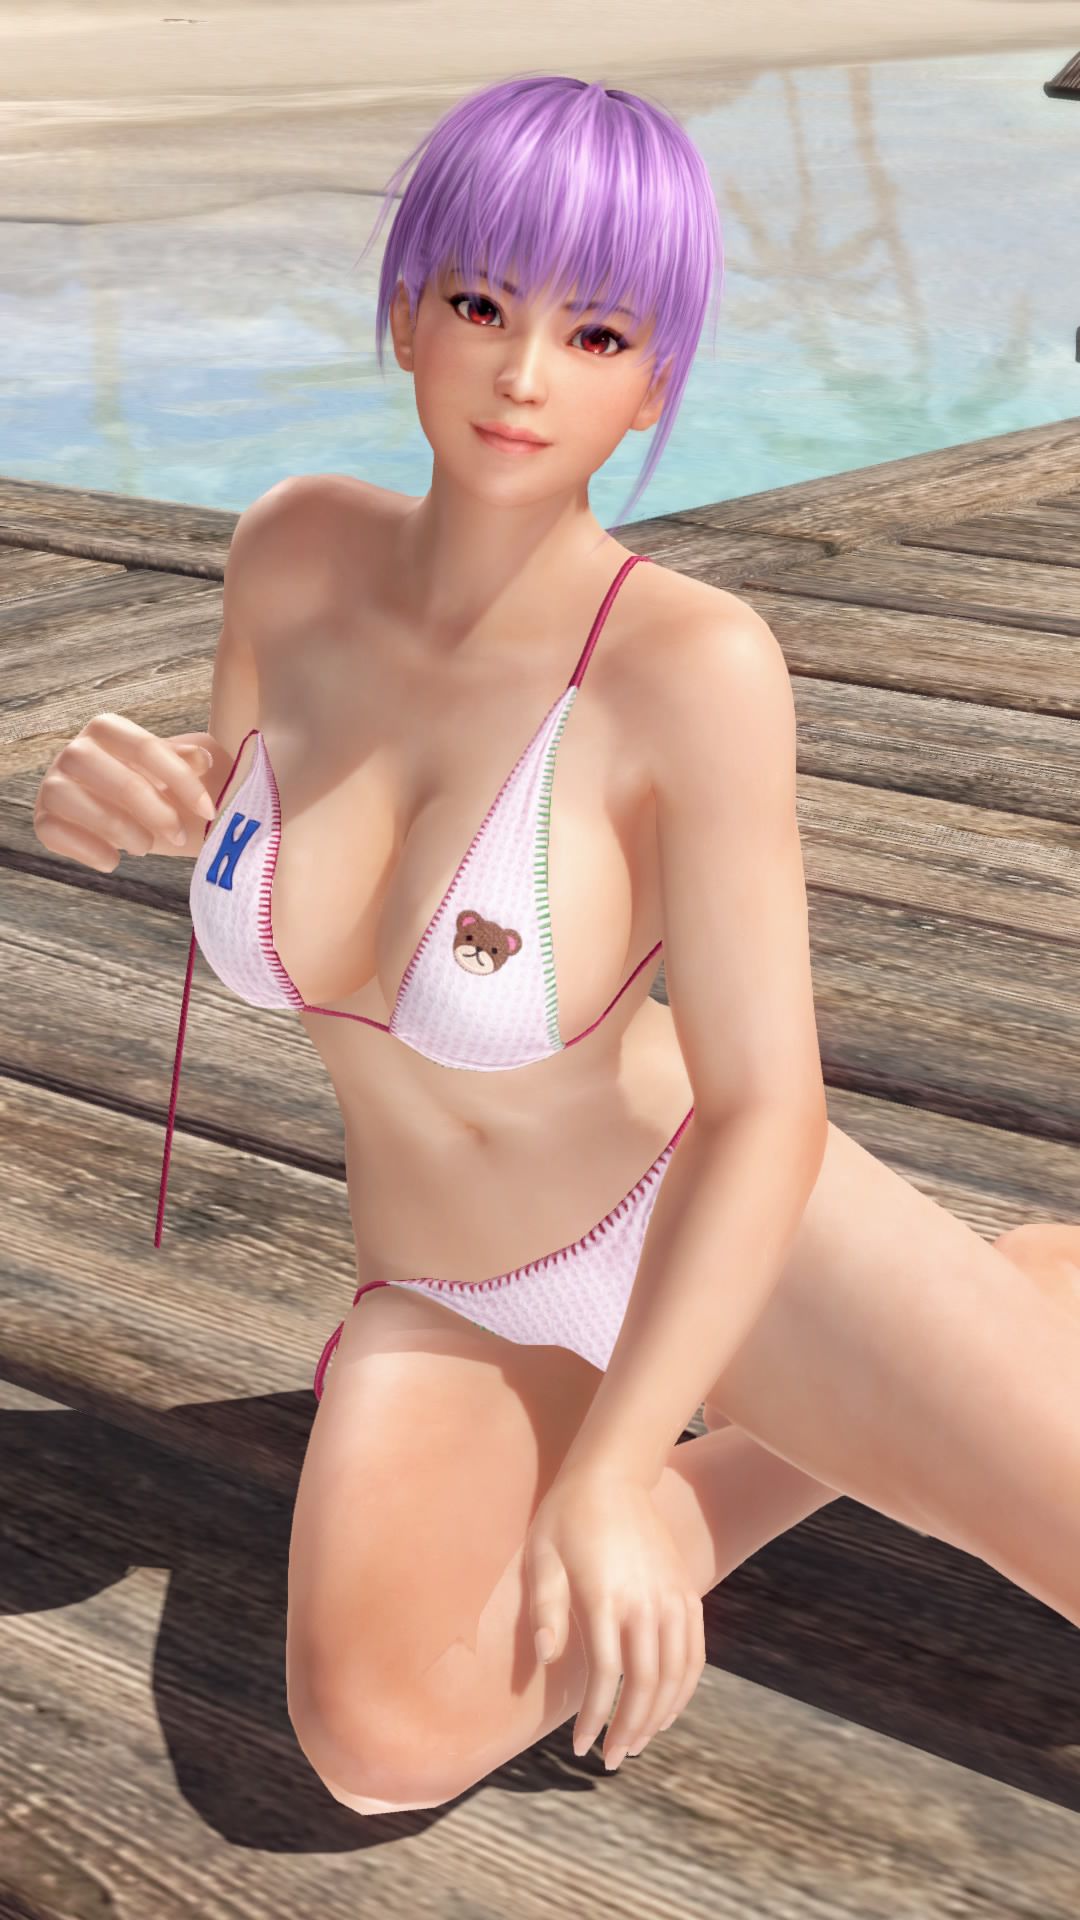 Doax3 "The color which suits the Aya-chan is pink" theory is verified 7